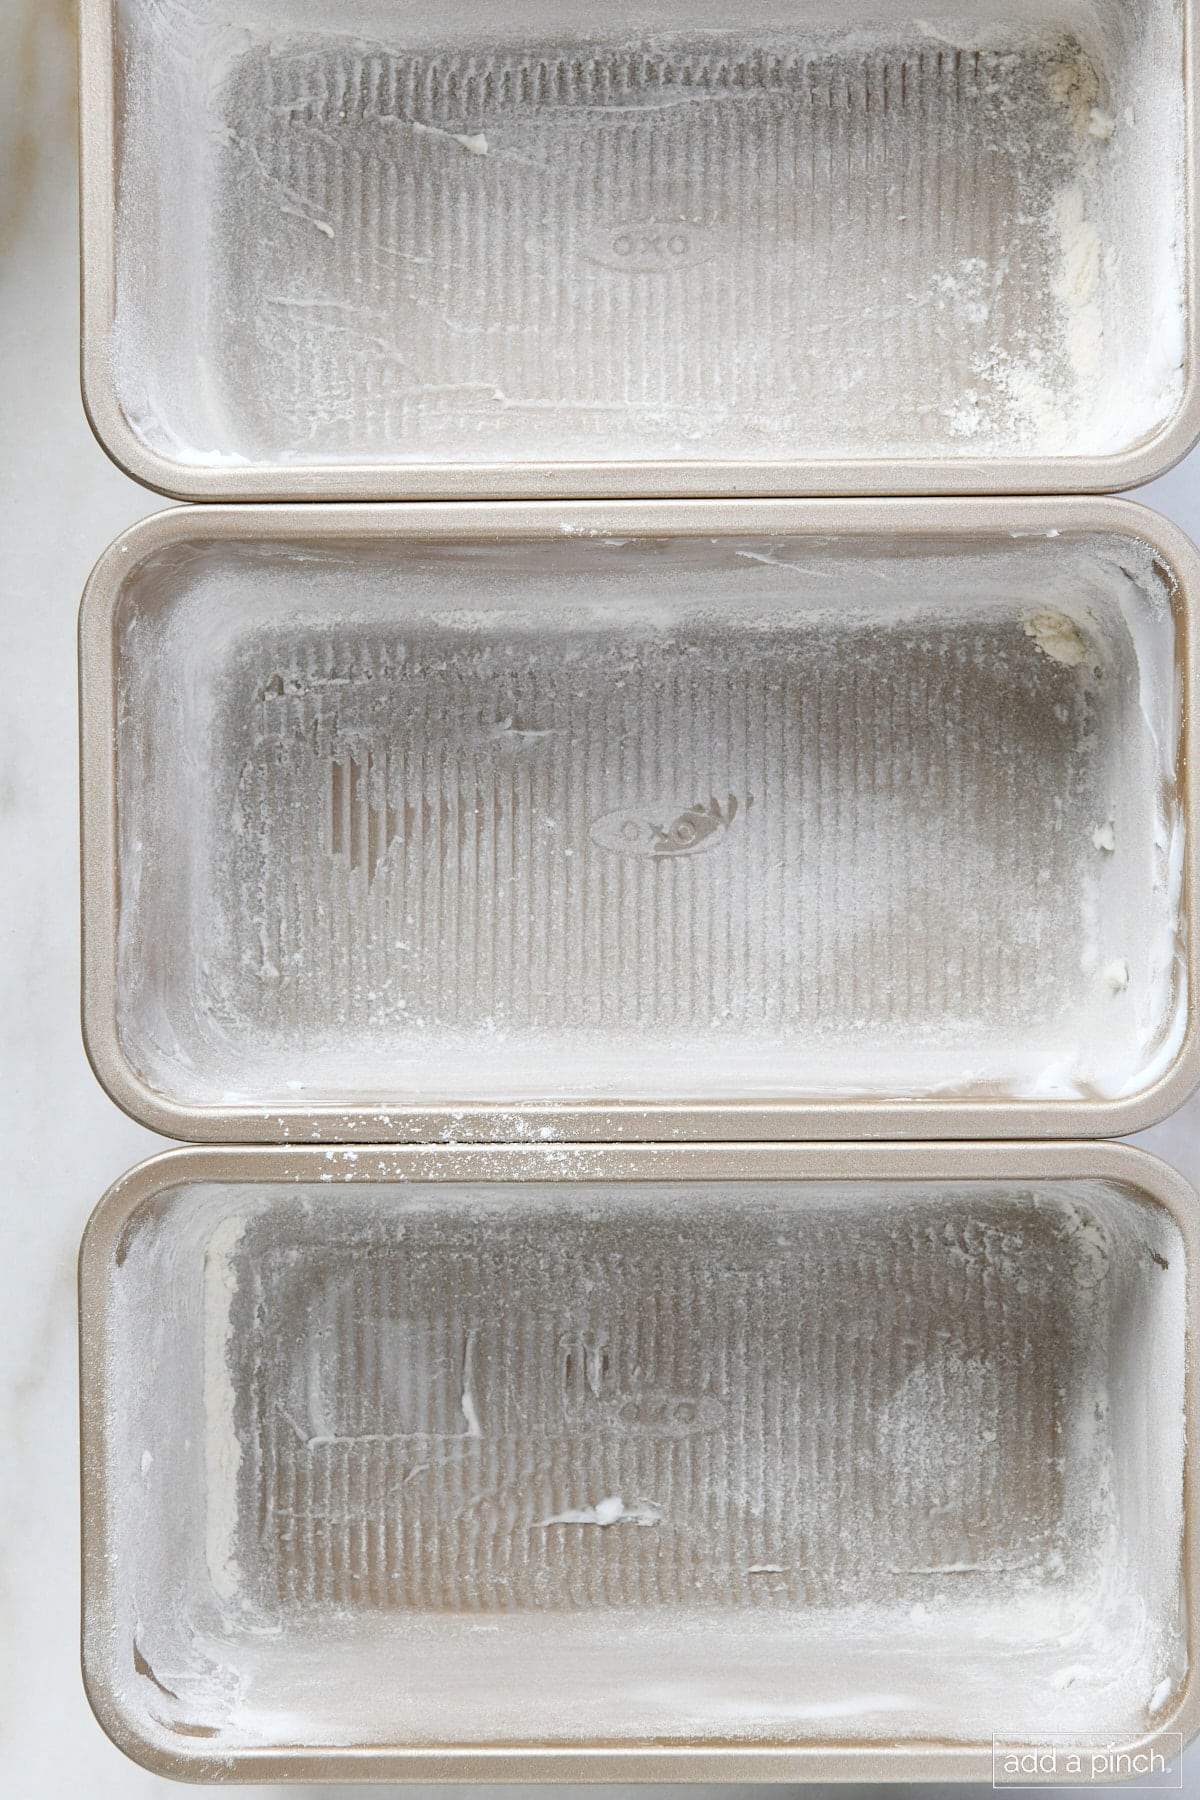 Three loaf pans have been completely  prepped with shortening and dusting with flour and are ready for baking.